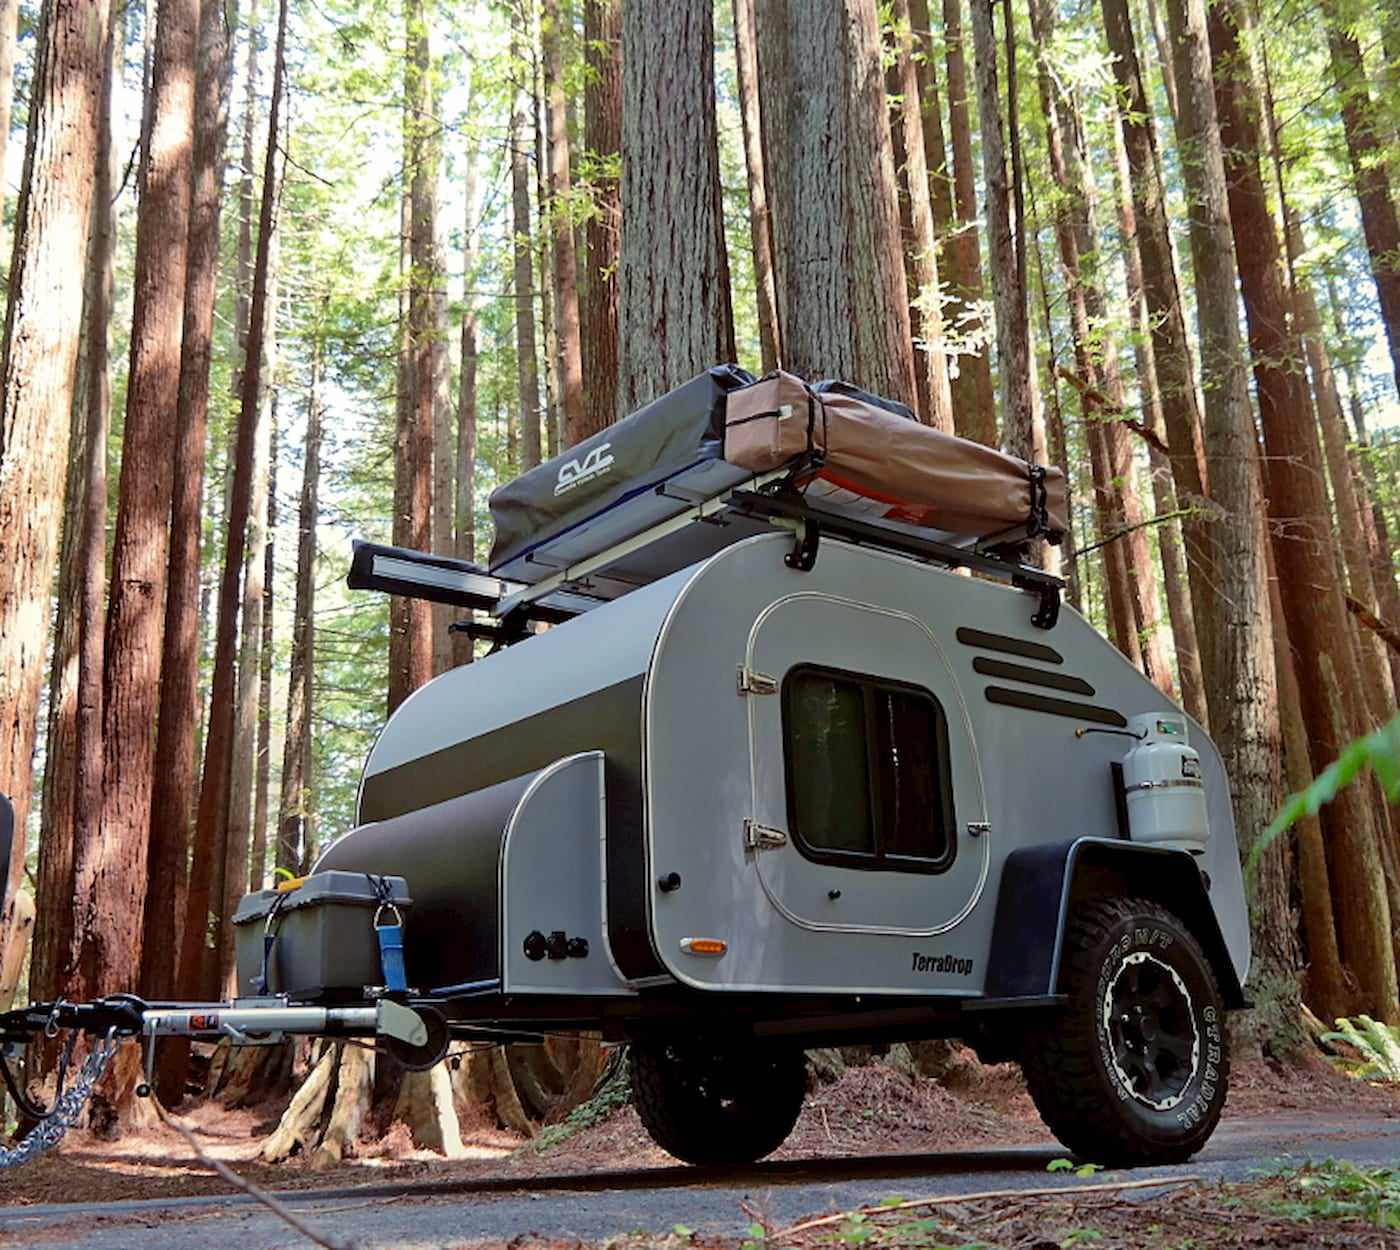 The Terradrop all terrain trailer equipped with a rooftop tent being towed through the forest